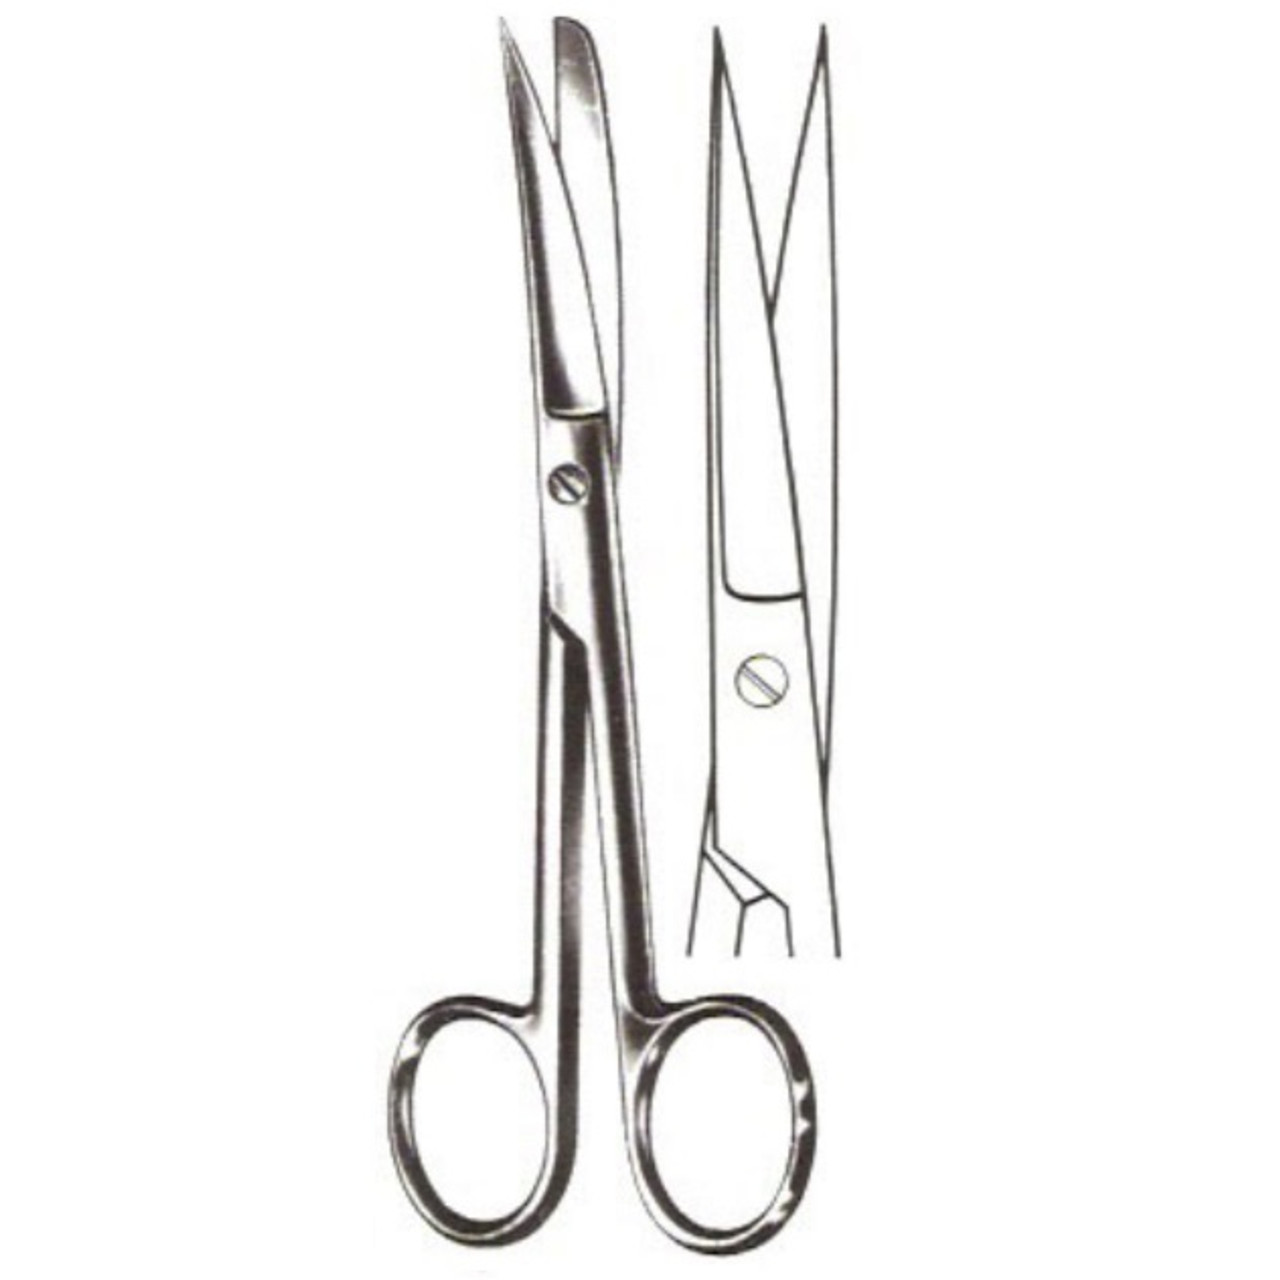 CURVED SHARP SCISSORS 4 1/4 Inch Medical Shears Nurse, Doctor Scissors  Medical Shears 